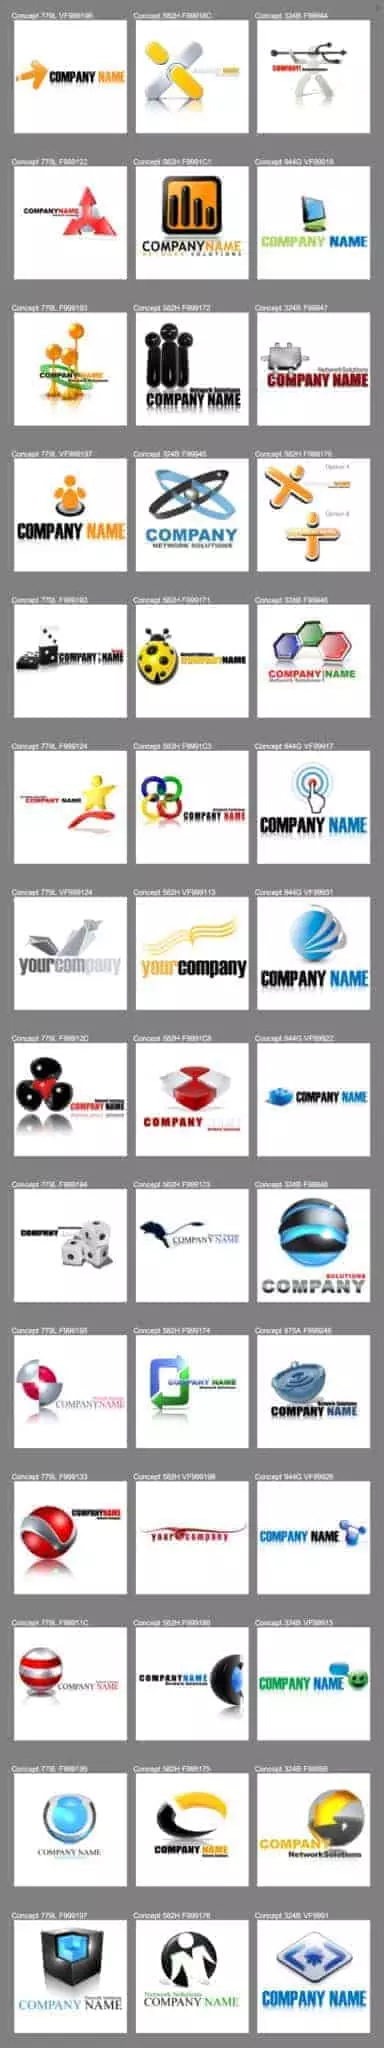 great Elements of a brand Logo 3